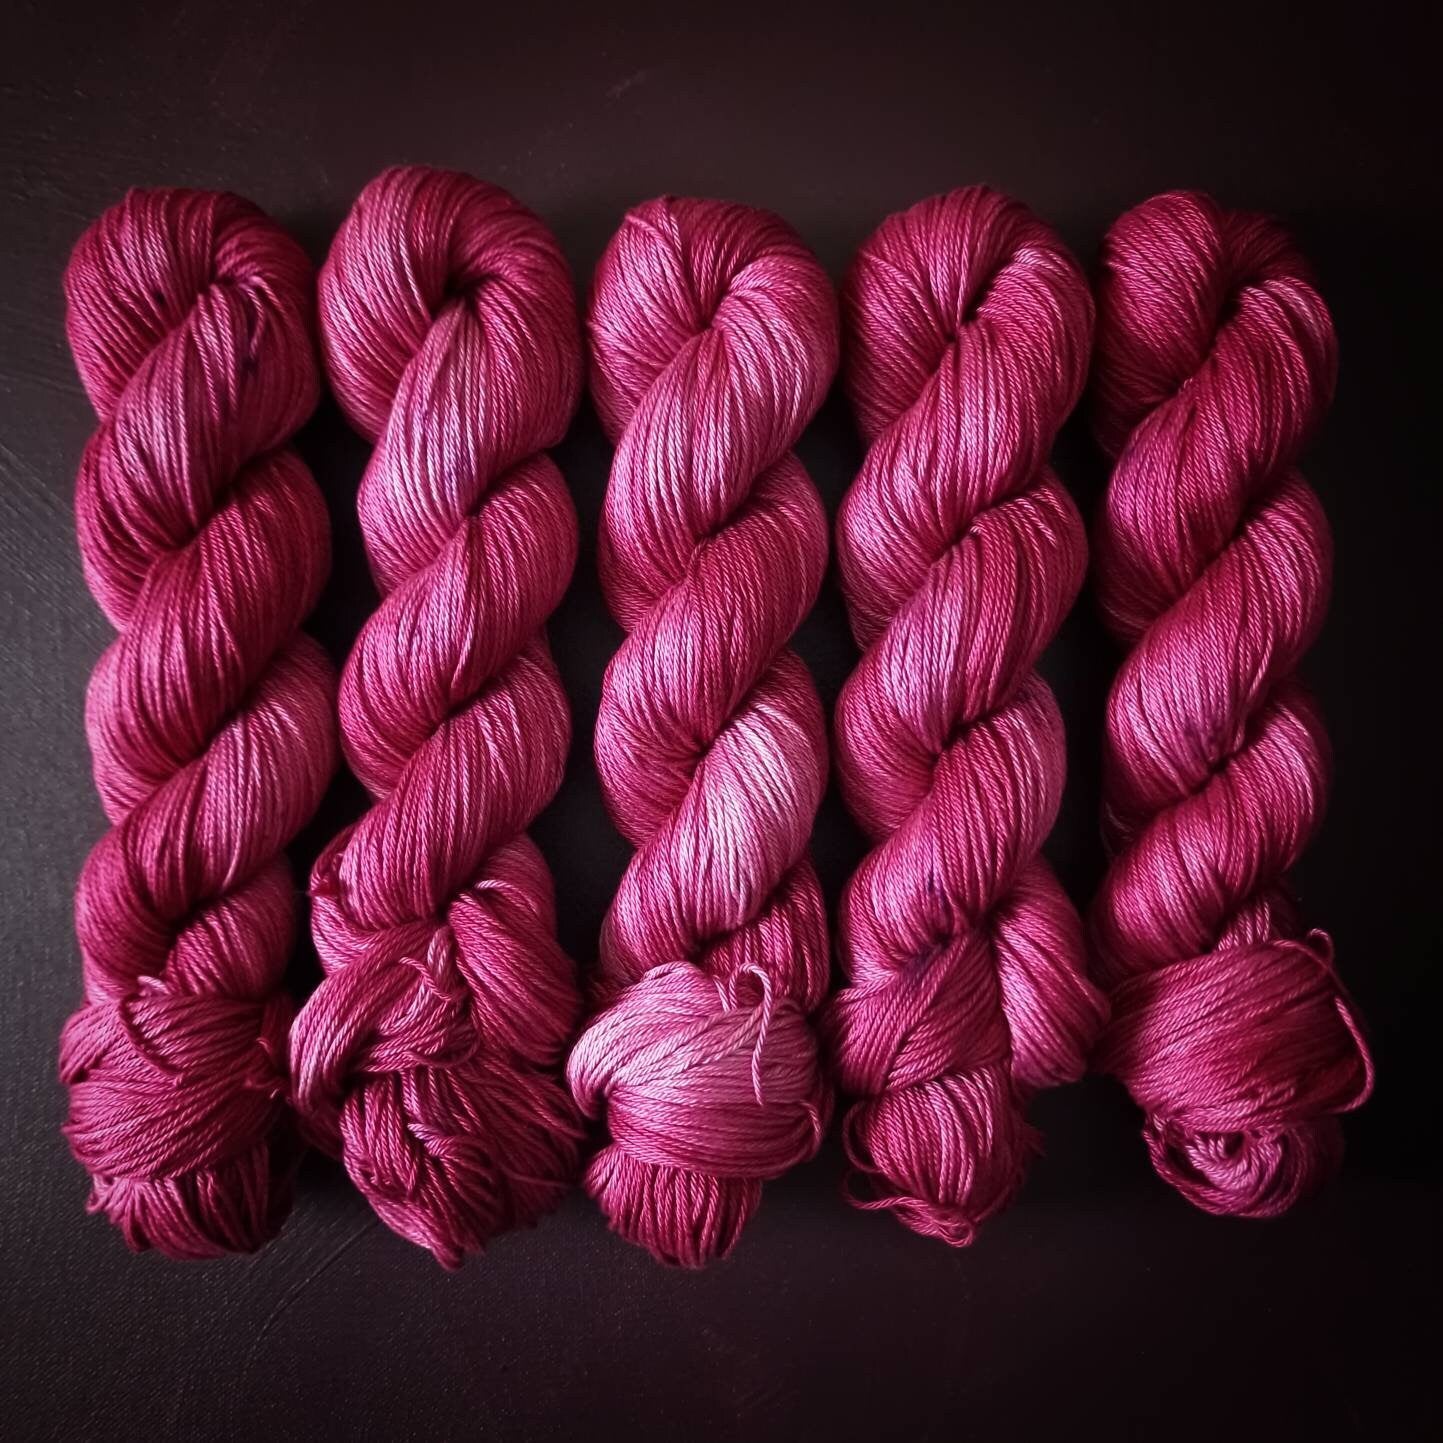 Hand dyed yarn ~ Pink Panther ~ mercerized cotton yarn, vegan, hand painted, indie dyed